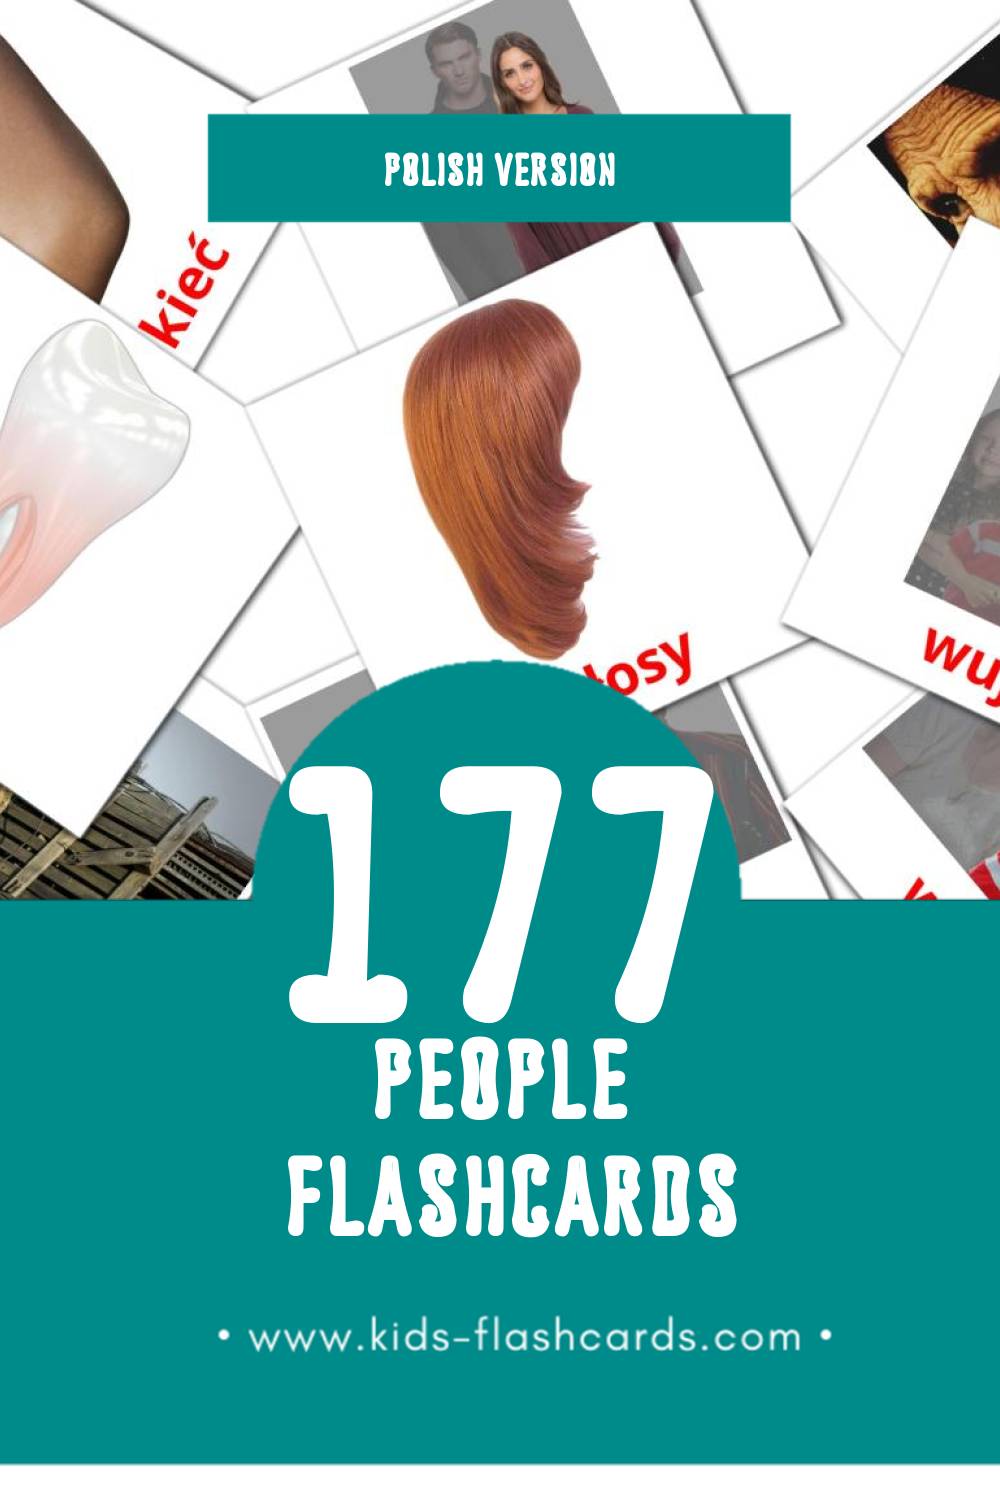 Visual ludzie Flashcards for Toddlers (177 cards in Polish)